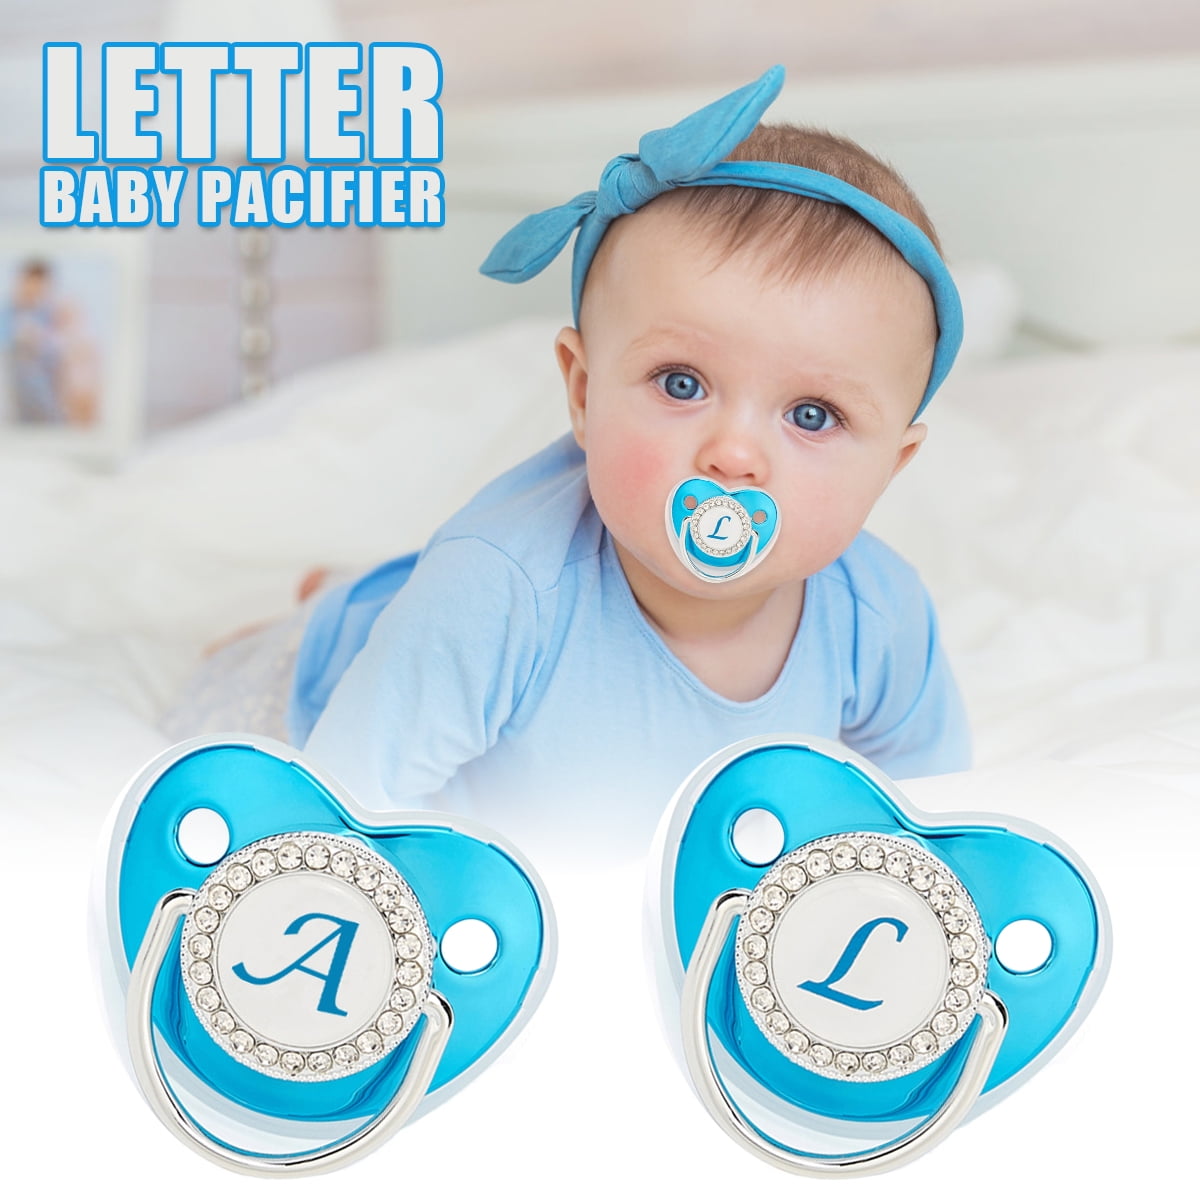 Personalized Name Tuxedo with Mustache Baby Pacifier 